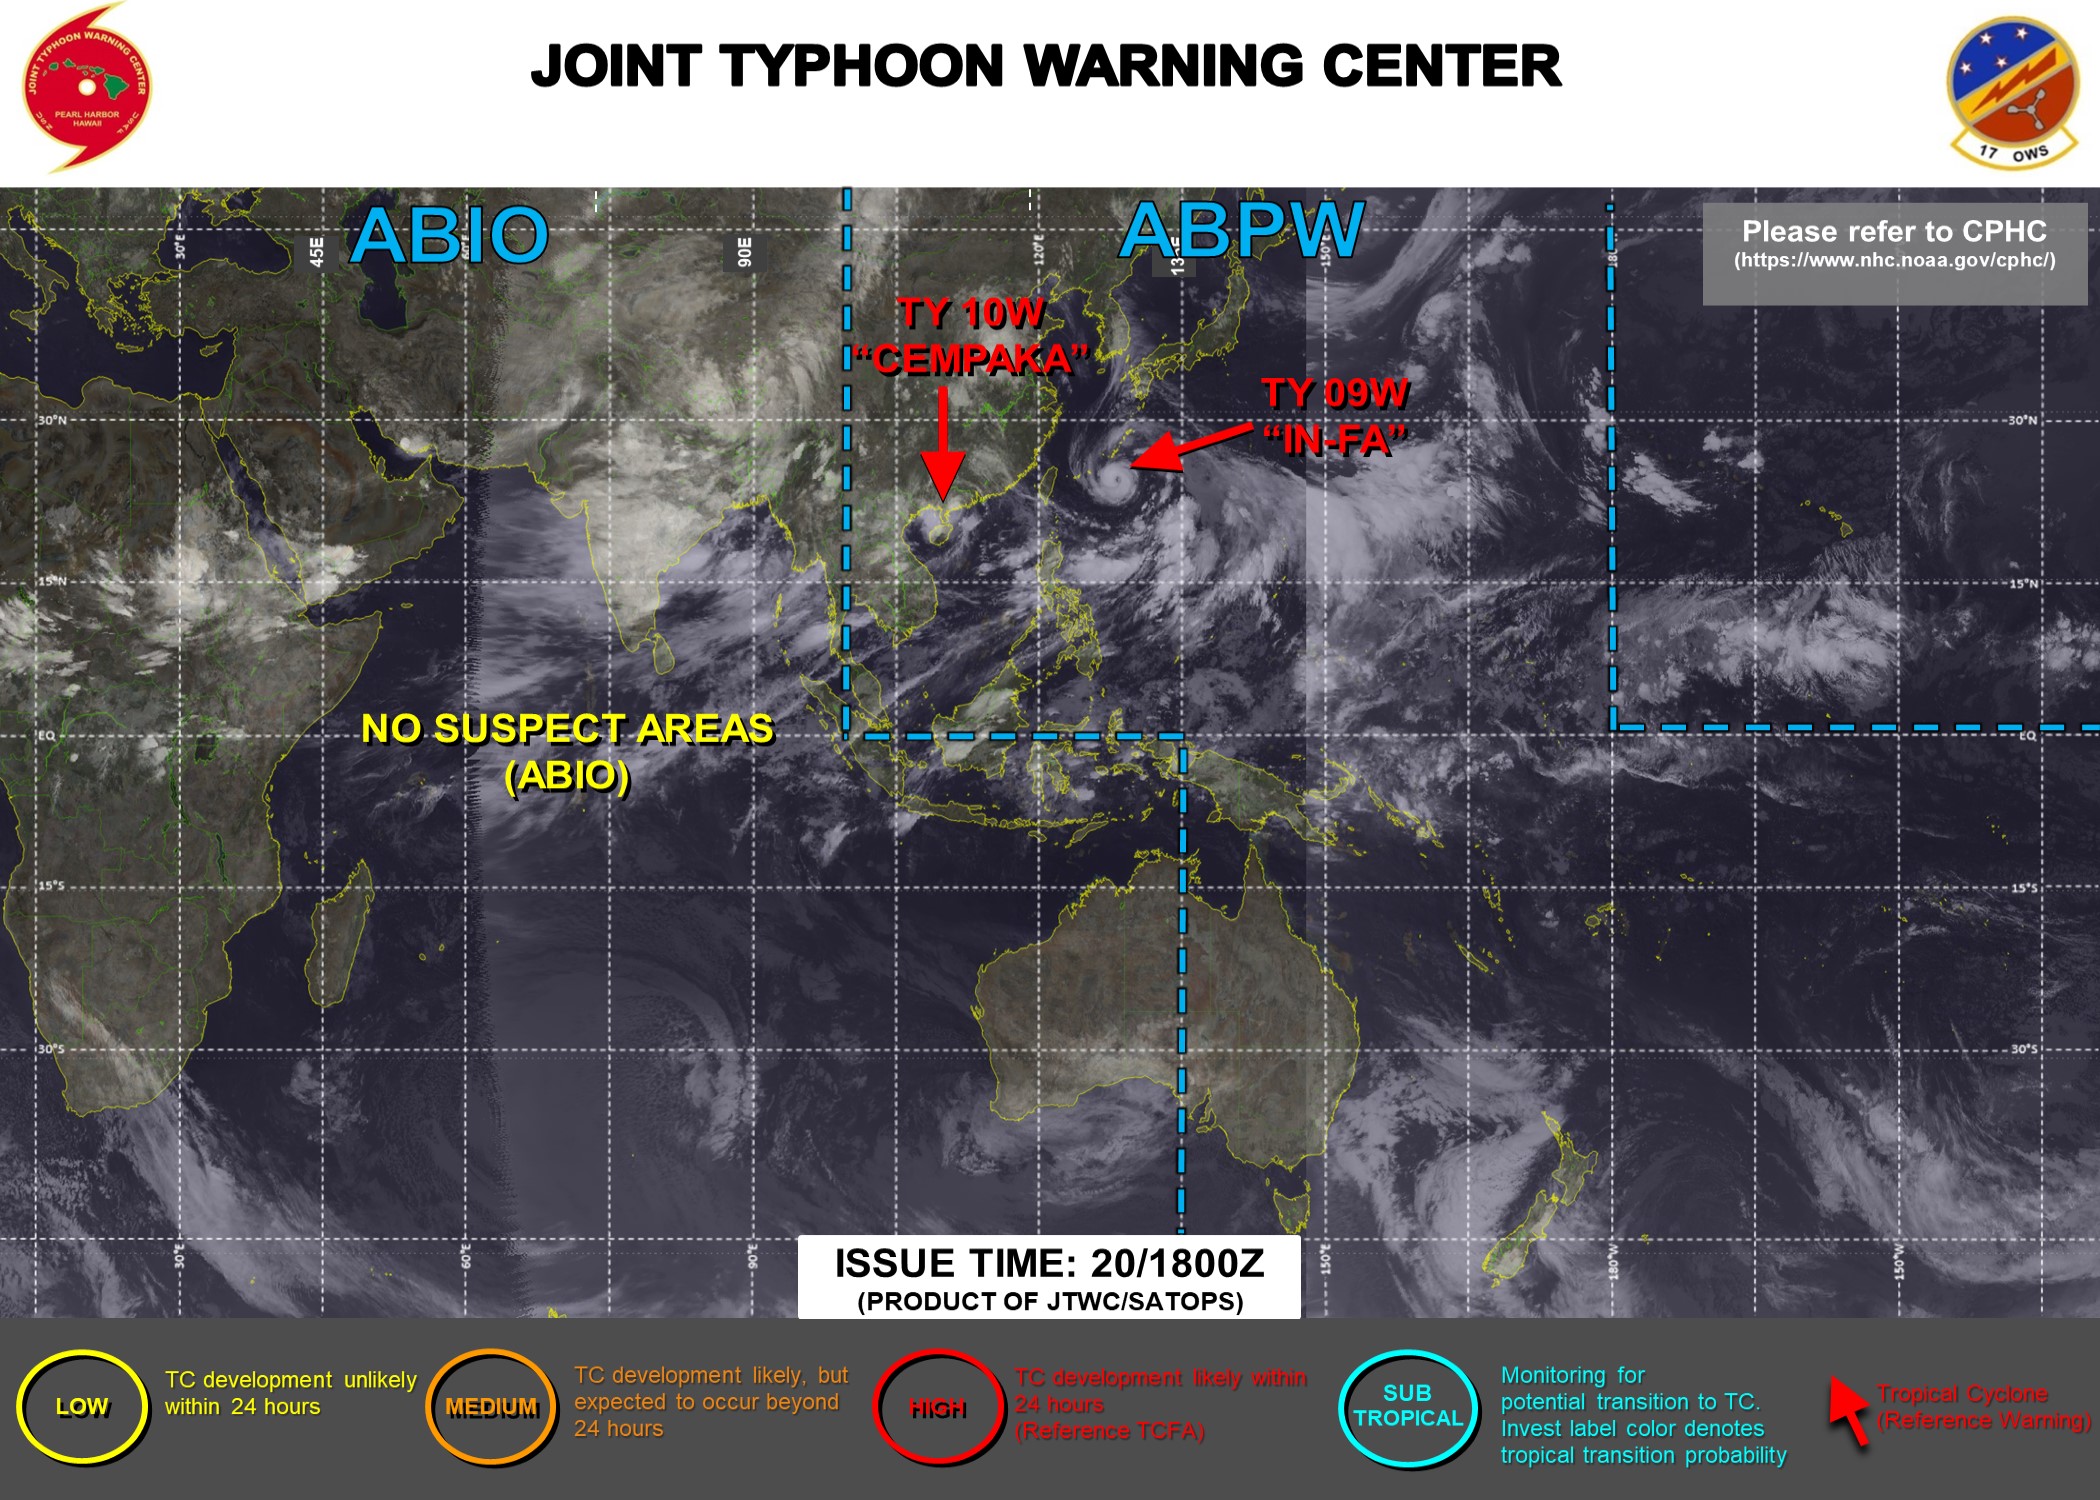 JTWC HAS BEEN ISSUING 6HOURLY WARNINGS ON 09W AND 10W. 3HOURLY SATELLITE BULLETINS ARE ISSUED FOR BOTH SYSTEMS.